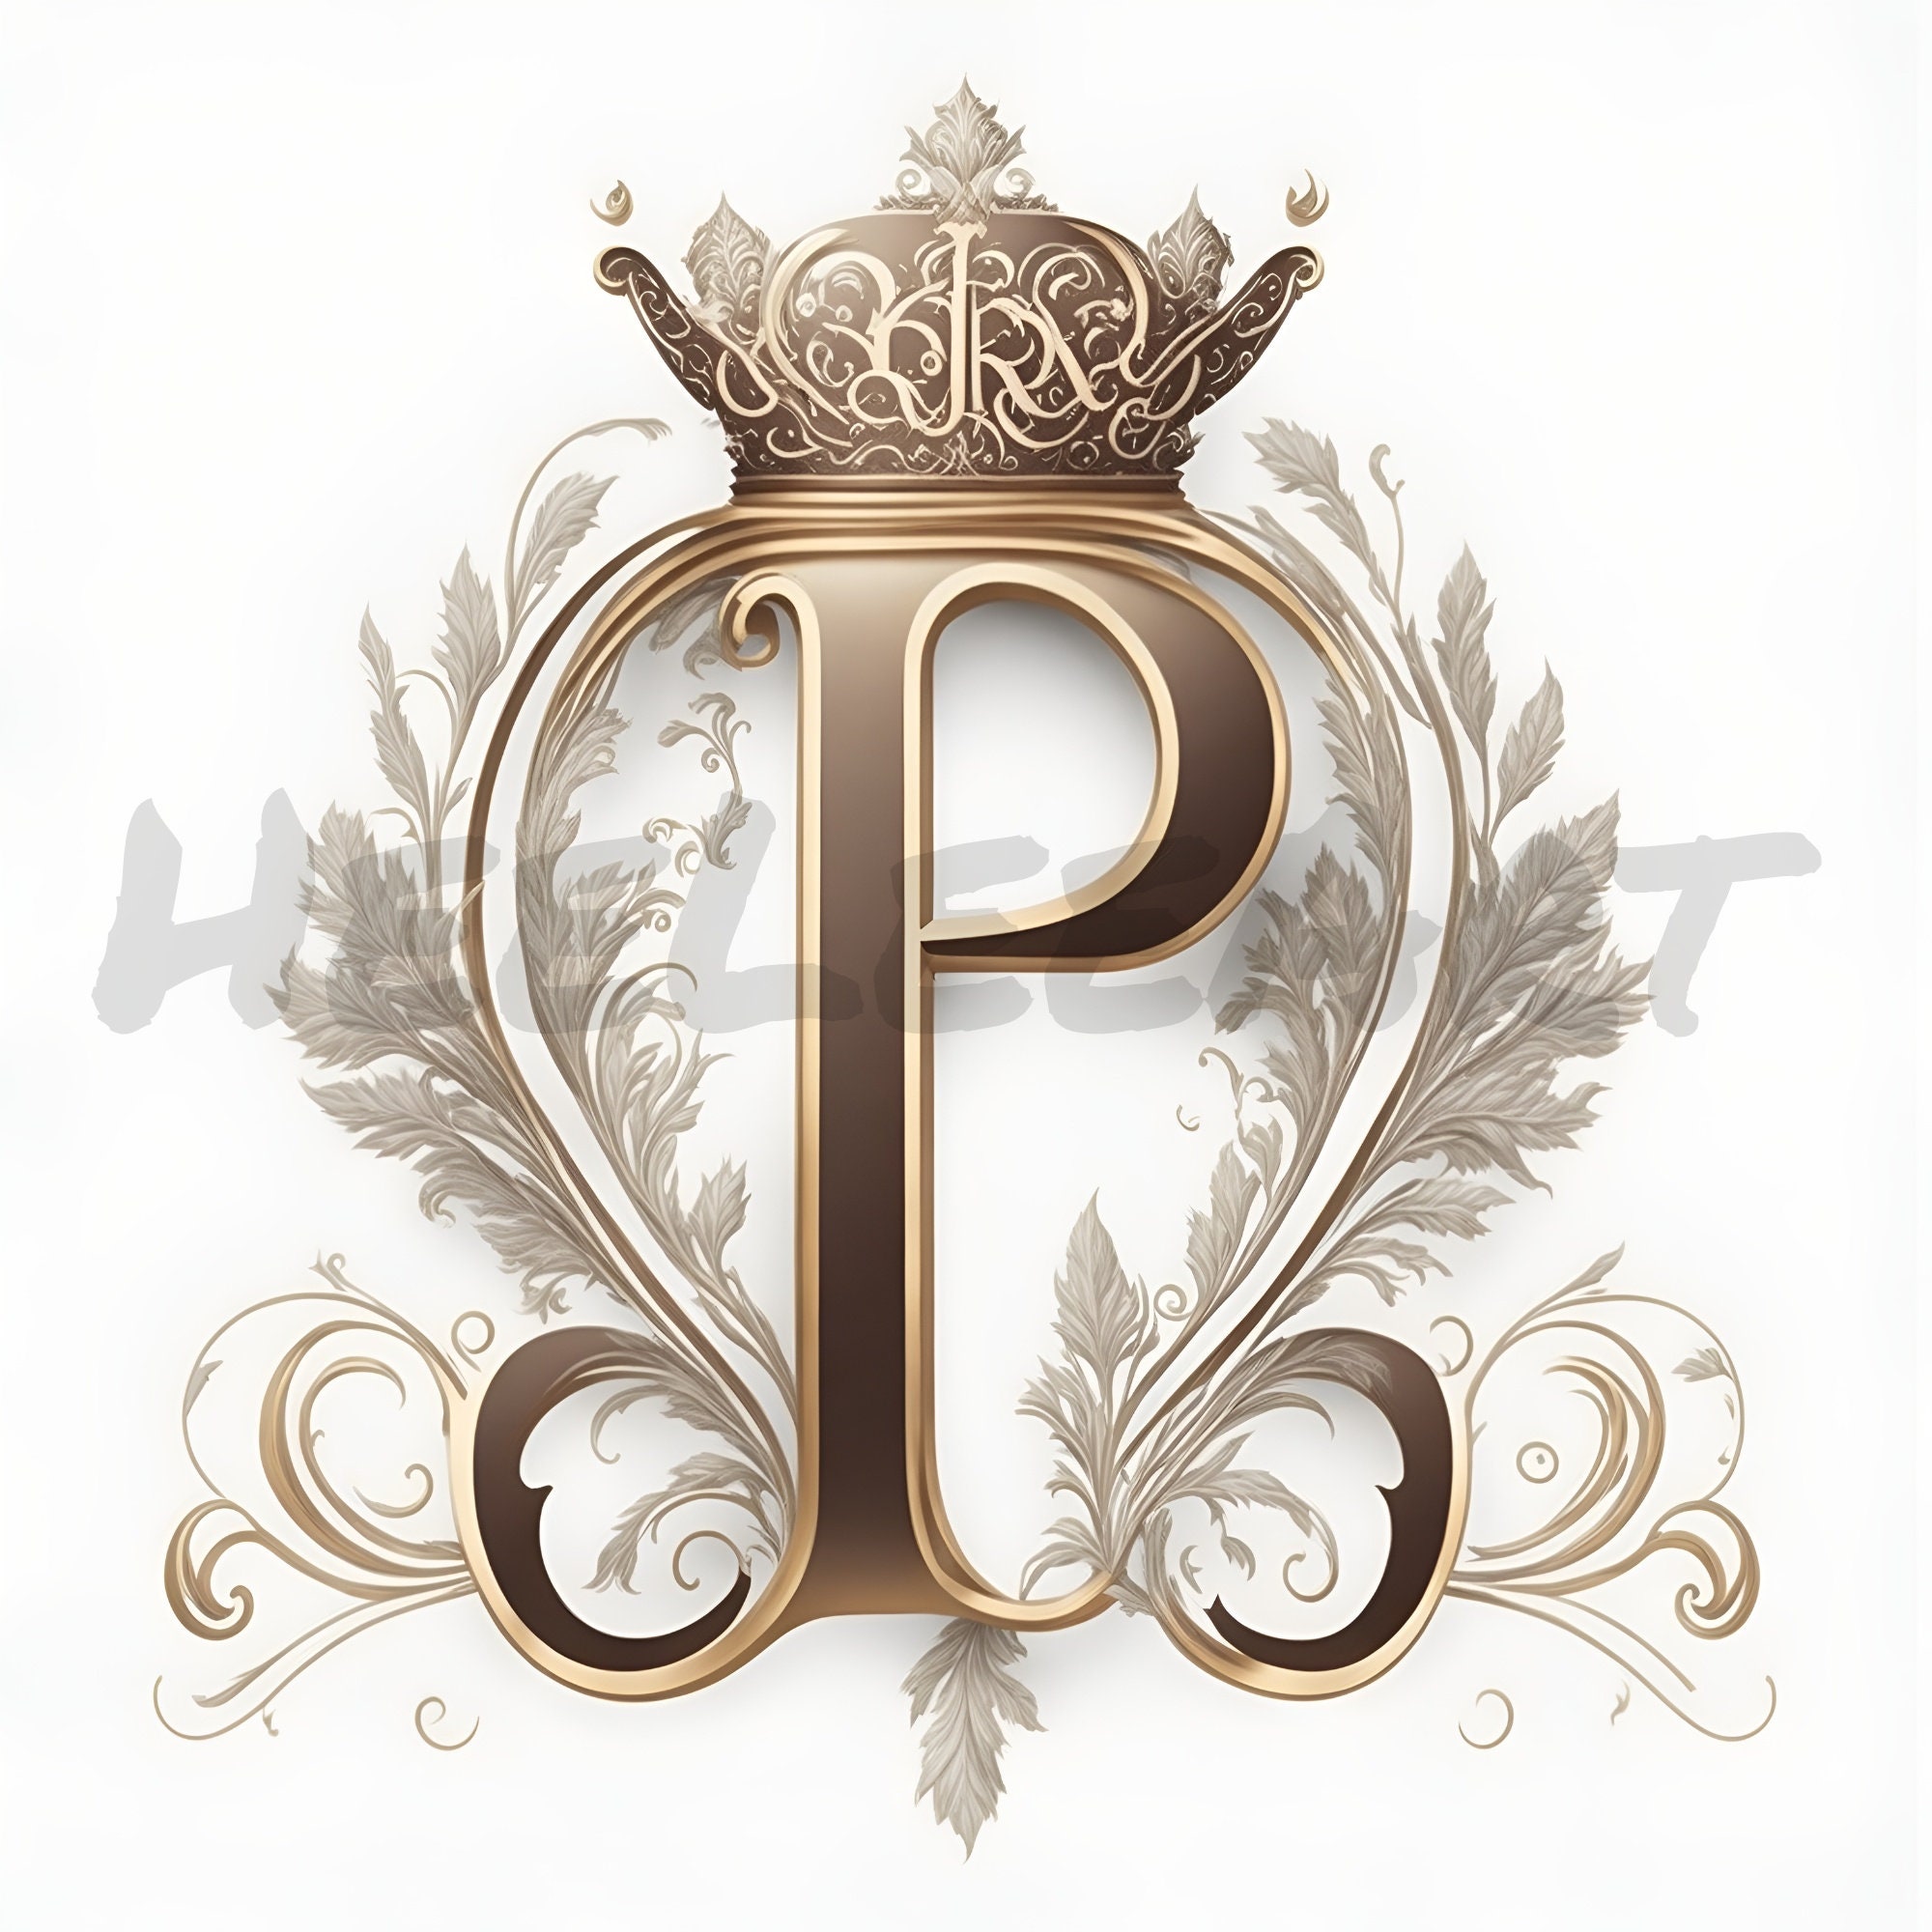 Digital Download Letter P Crown on Whitish Background Alphabet Initials  Monogram AI Generated Art Print Printable Image Stock Photo PNG 